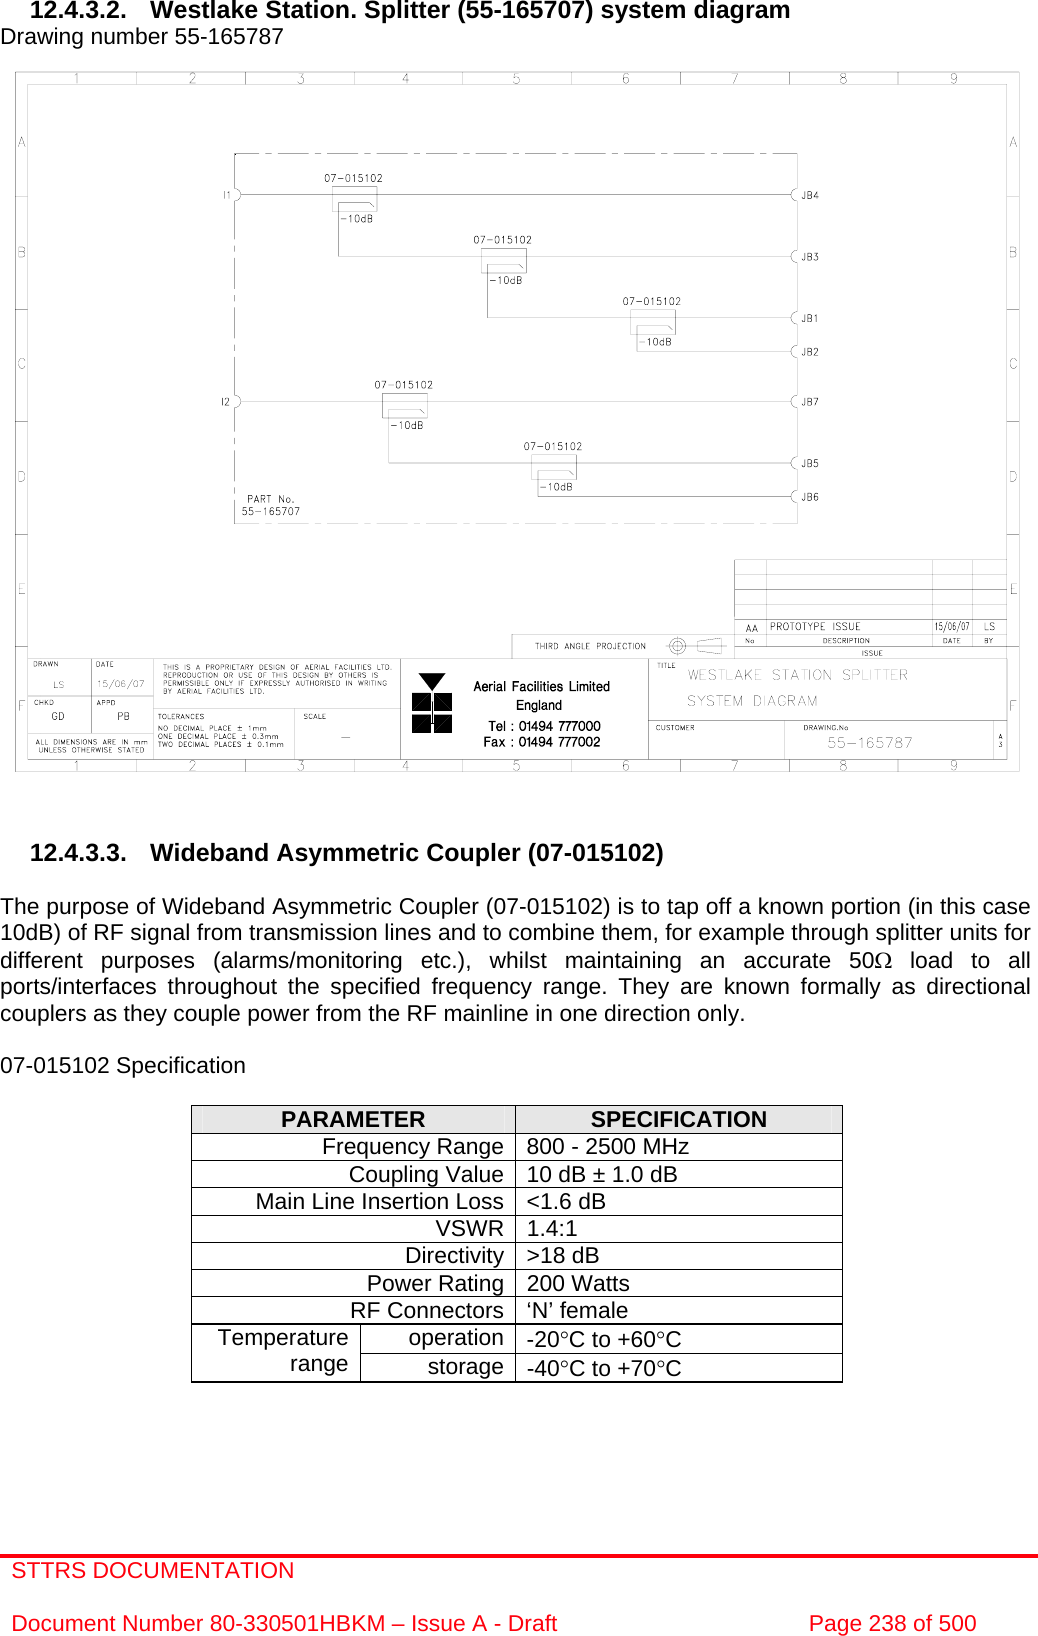 STTRS DOCUMENTATION  Document Number 80-330501HBKM – Issue A - Draft  Page 238 of 500   12.4.3.2. Westlake Station. Splitter (55-165707) system diagram Drawing number 55-165787                               12.4.3.3. Wideband Asymmetric Coupler (07-015102)  The purpose of Wideband Asymmetric Coupler (07-015102) is to tap off a known portion (in this case 10dB) of RF signal from transmission lines and to combine them, for example through splitter units for different purposes (alarms/monitoring etc.), whilst maintaining an accurate 50Ω load to all ports/interfaces throughout the specified frequency range. They are known formally as directional couplers as they couple power from the RF mainline in one direction only.   07-015102 Specification  PARAMETER  SPECIFICATION Frequency Range 800 - 2500 MHz Coupling Value 10 dB ± 1.0 dB Main Line Insertion Loss &lt;1.6 dB VSWR 1.4:1 Directivity &gt;18 dB Power Rating 200 Watts RF Connectors ‘N’ female operation -20°C to +60°C Temperature range  storage -40°C to +70°C     